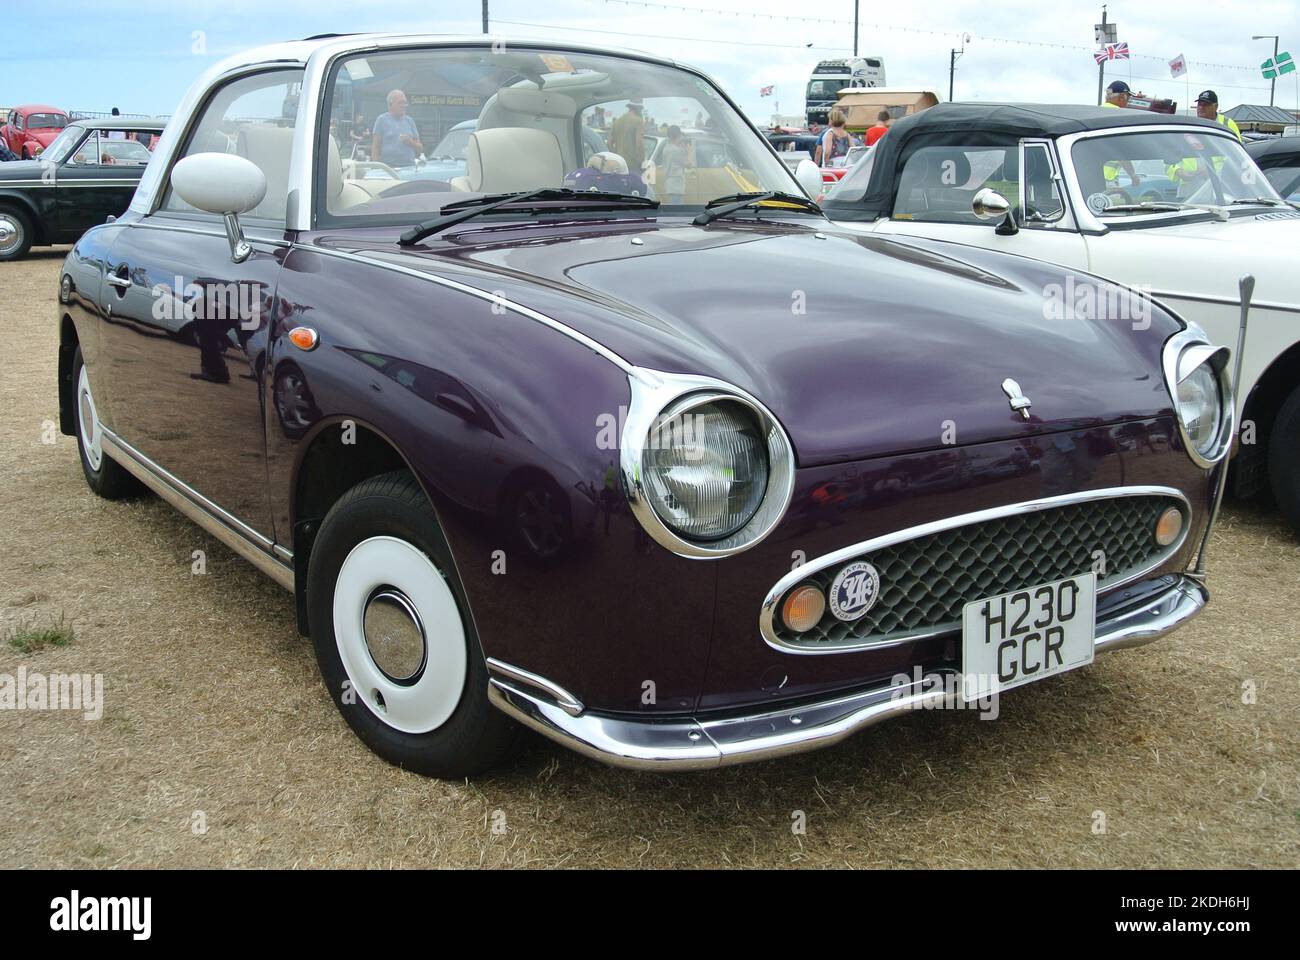 A 1991 Nissan Figaro parked on display at the English Riviera classic car show, Paignton, Devon, England, UK. Stock Photo